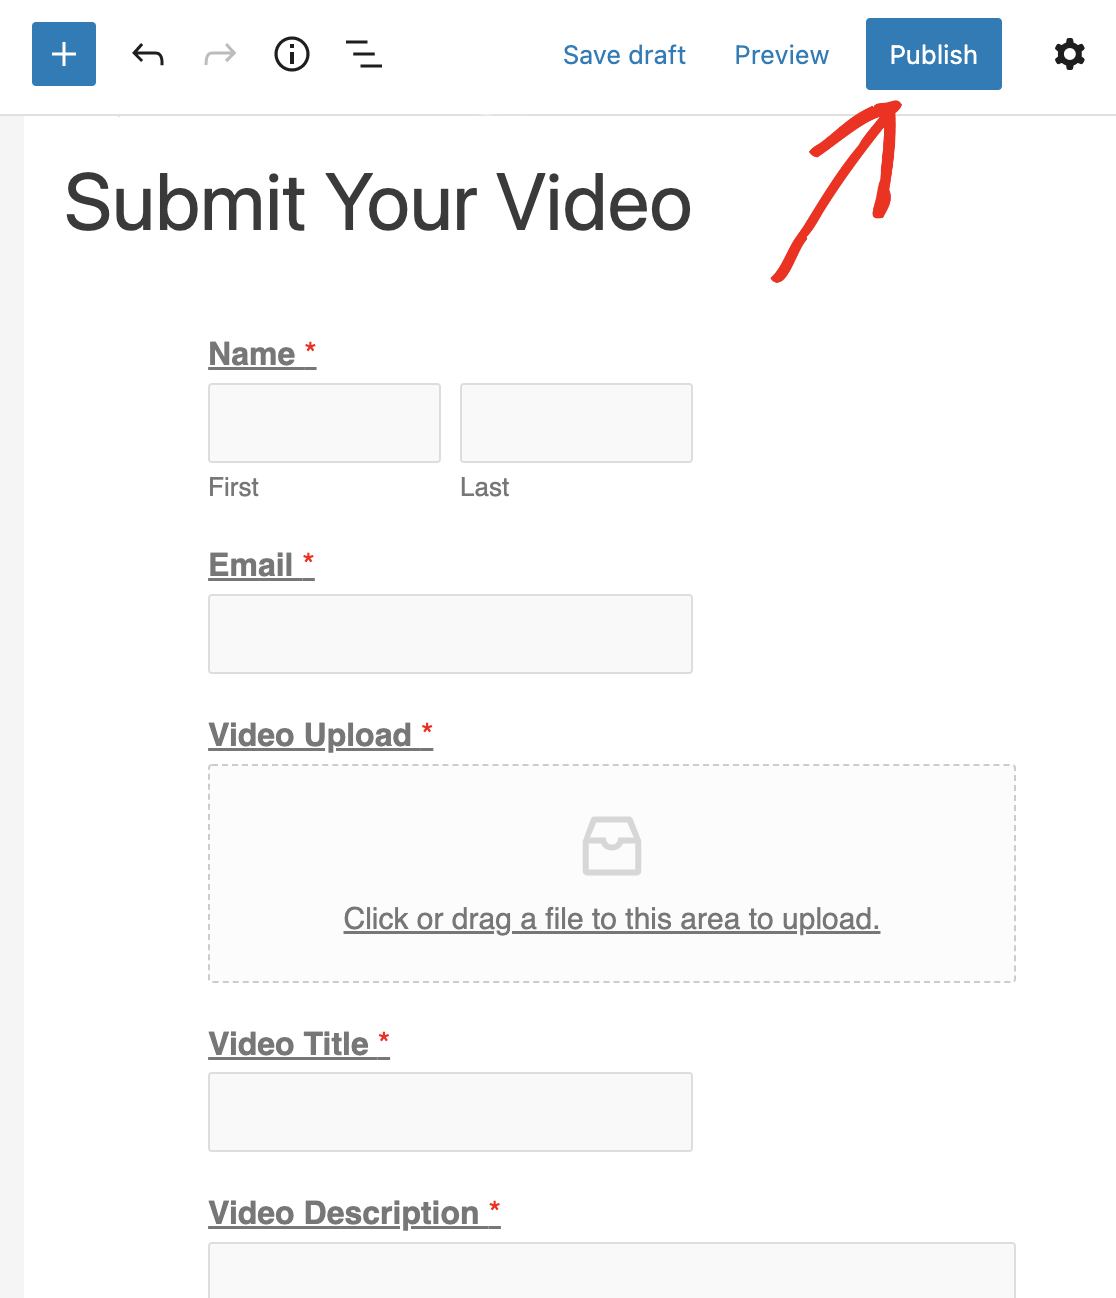 Publishing your video upload form